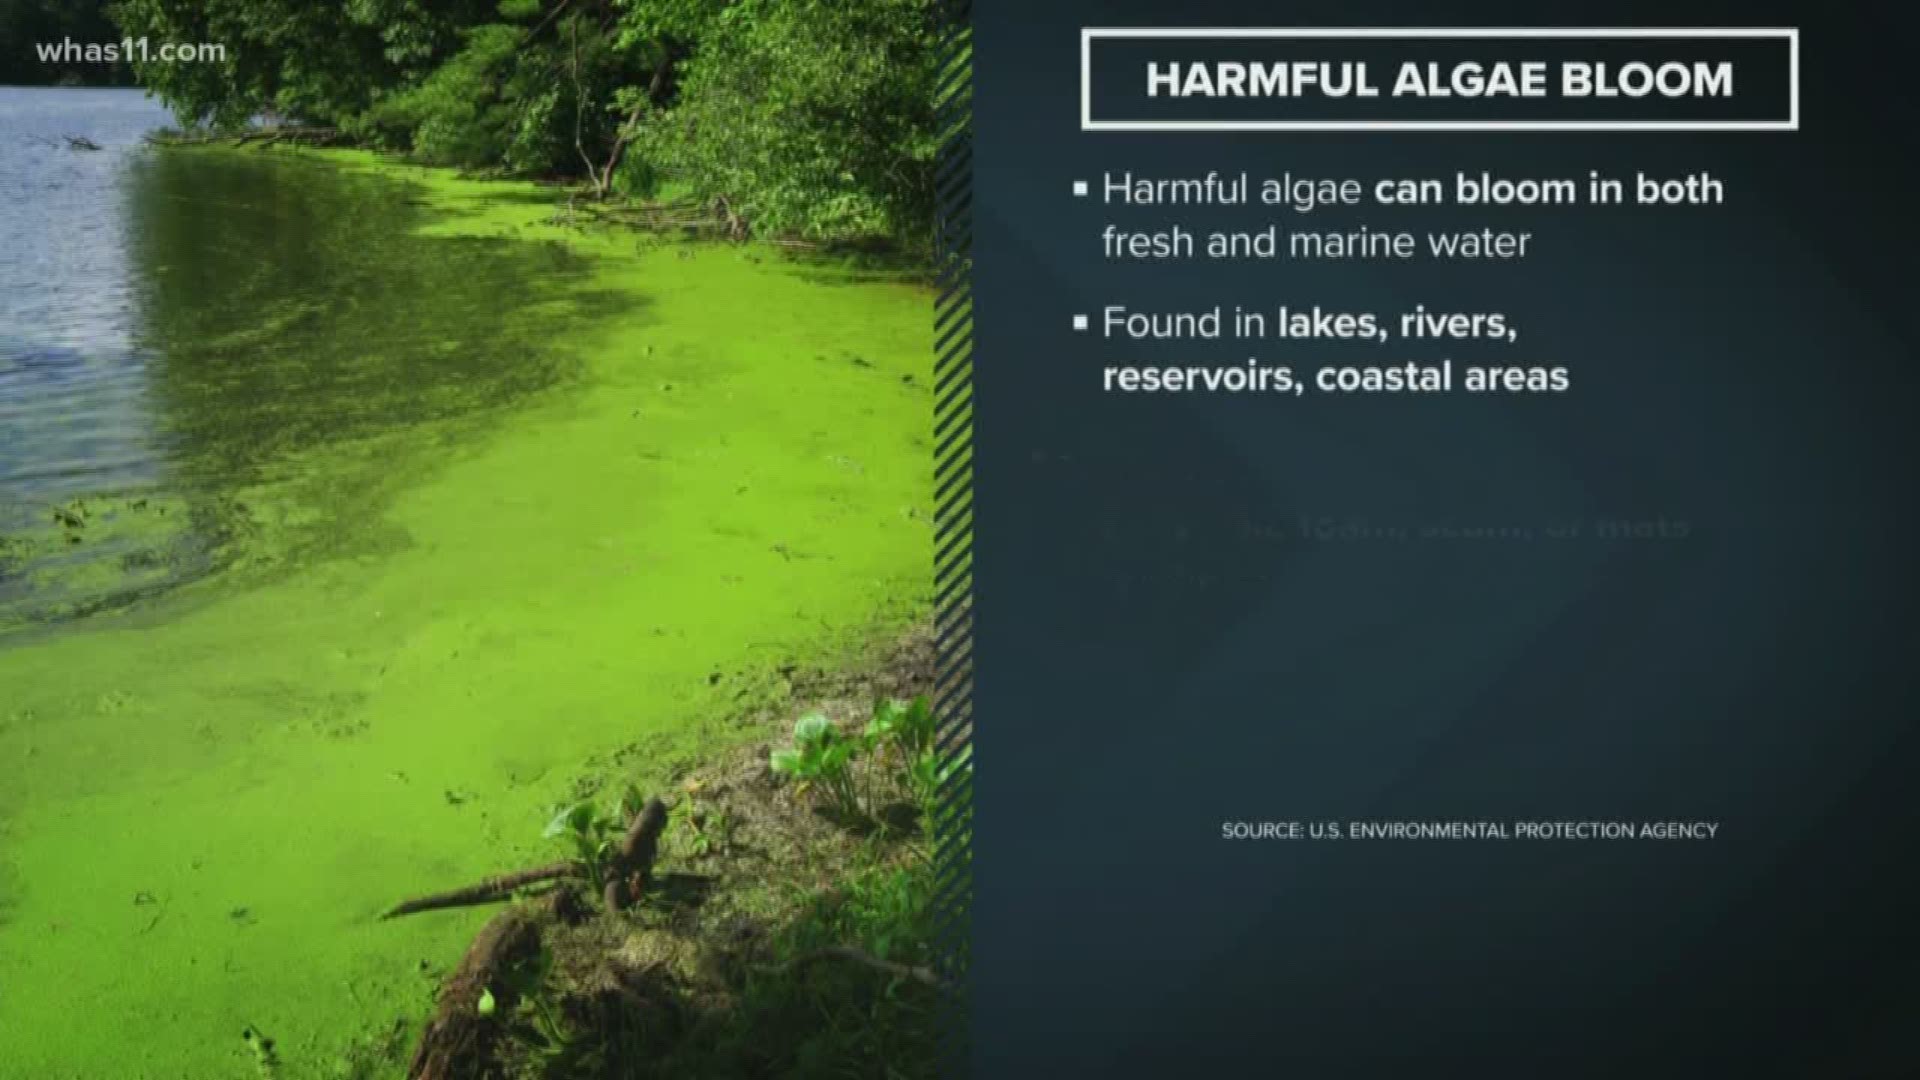 State officials said it's common to find Blue-Green Algae blooms in Indiana lakes around this time of year.